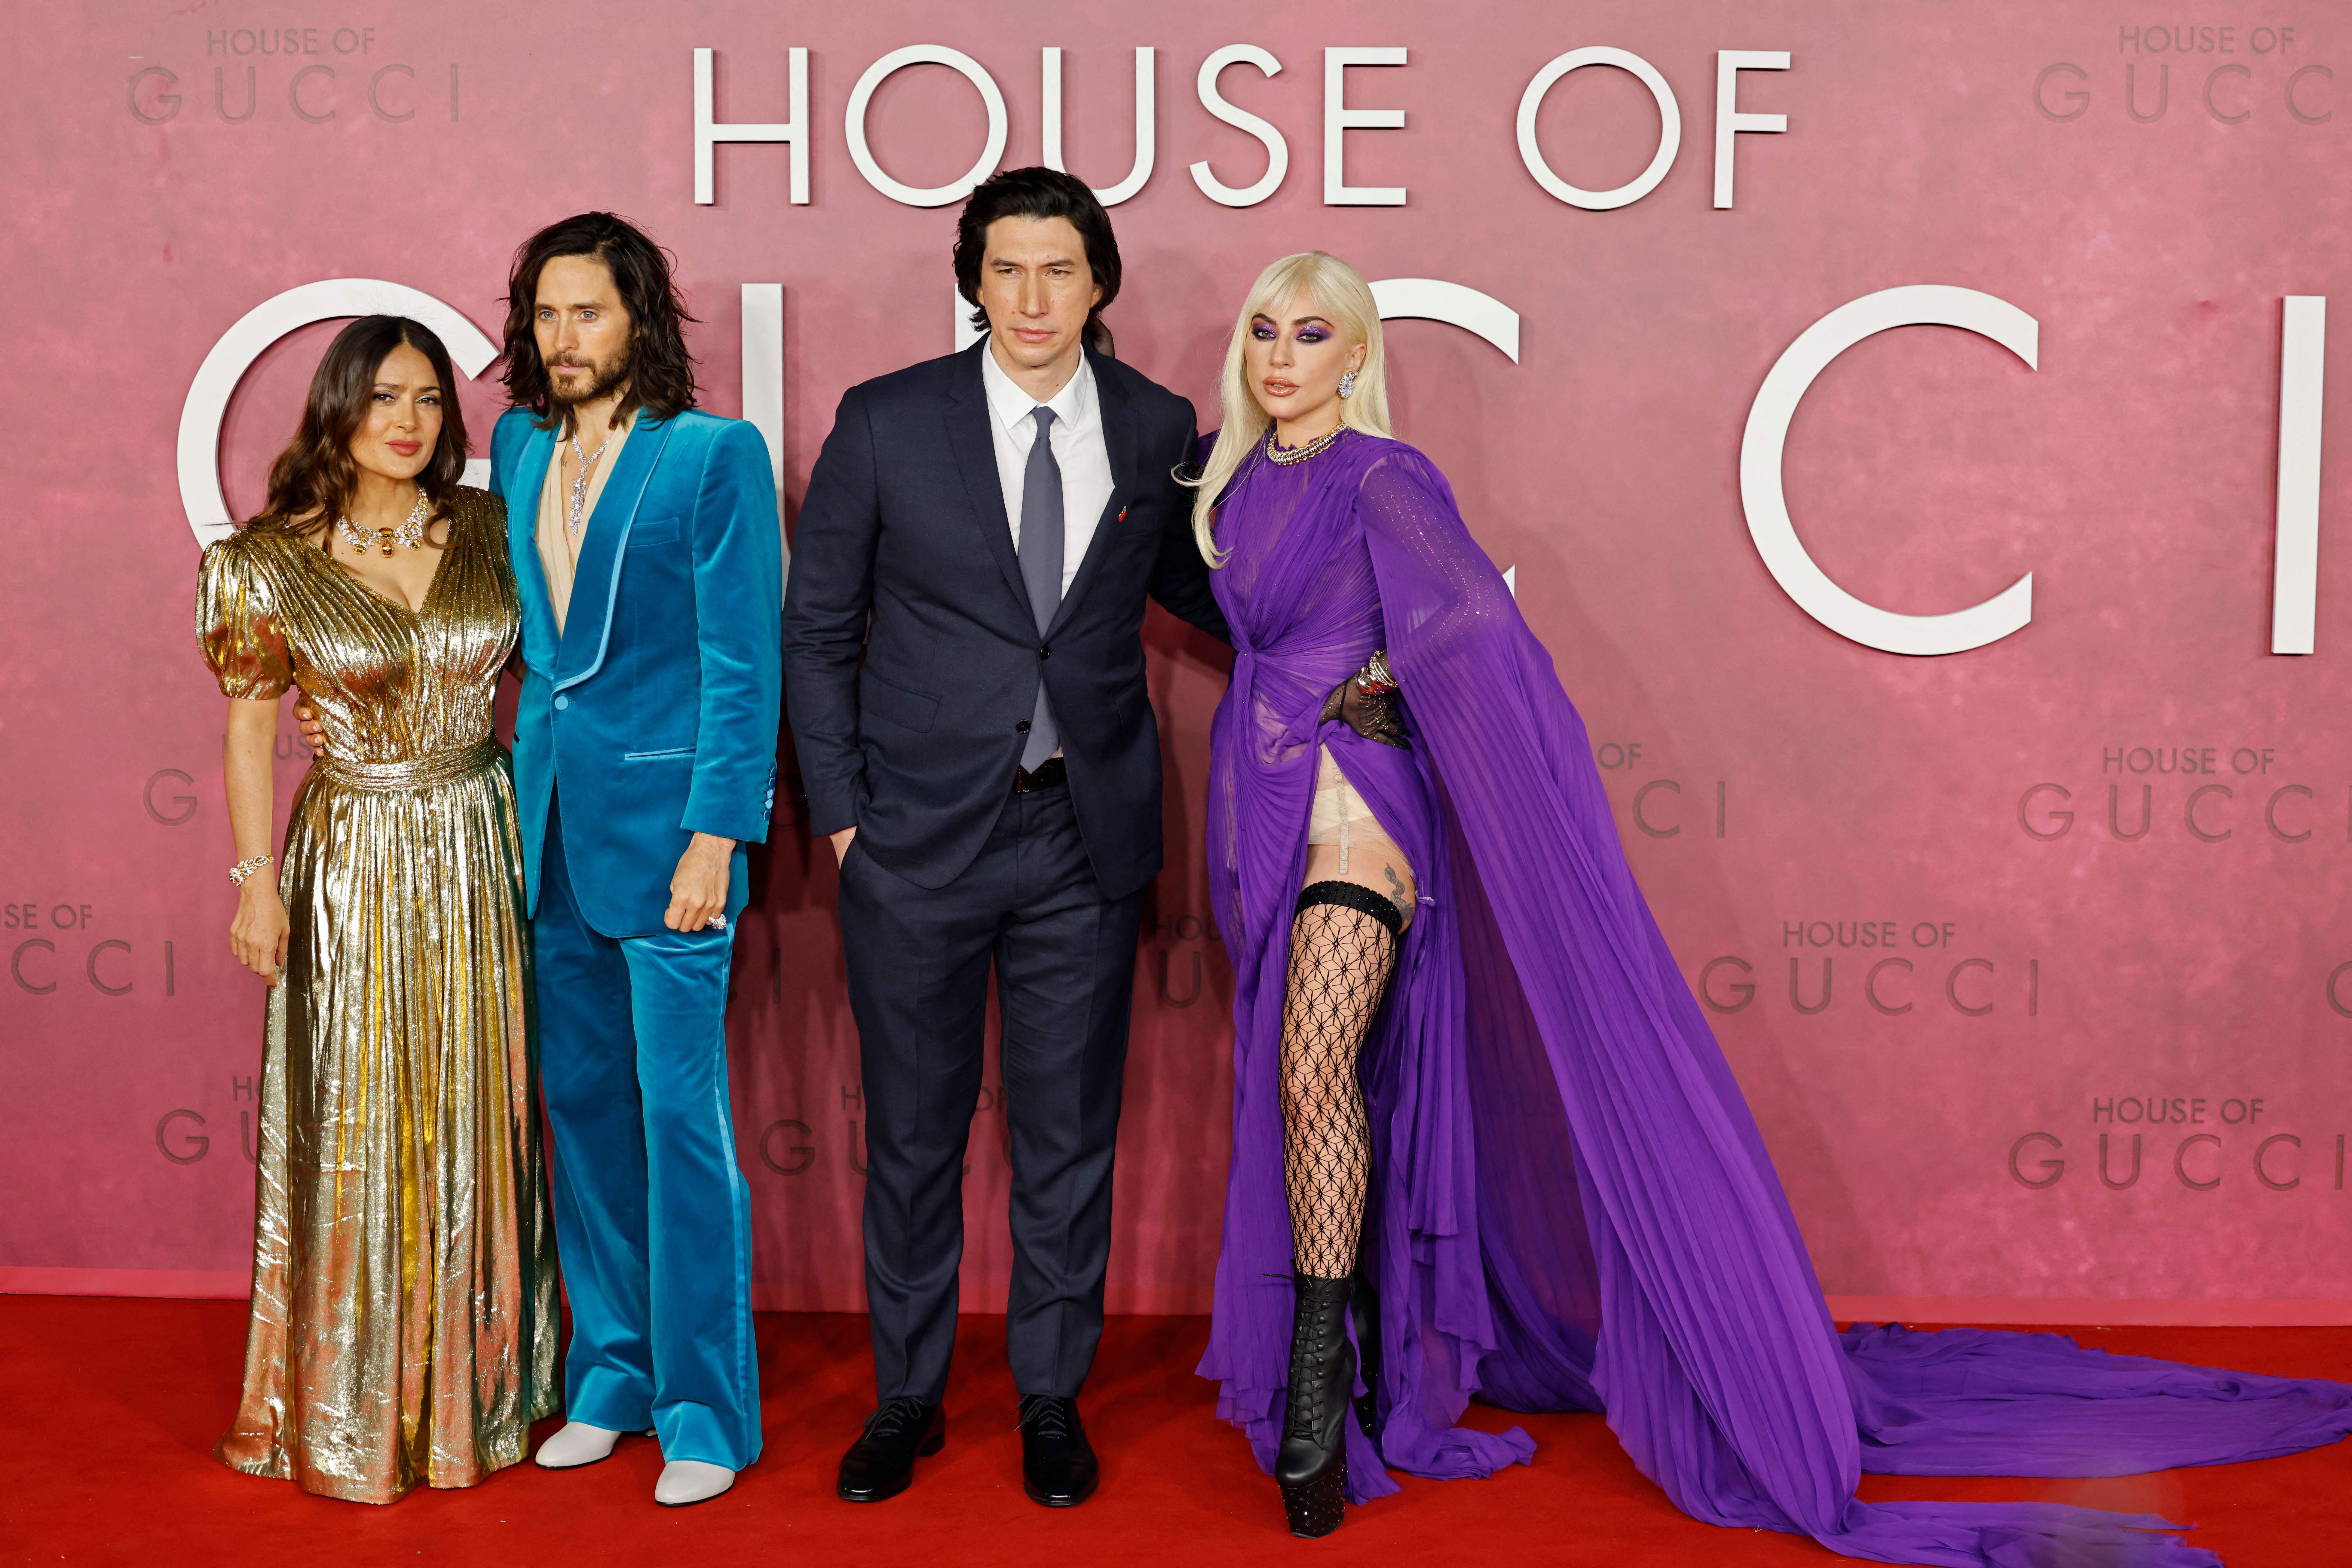 brevpapir Jolly Gurgle House of Gucci' London Premiere: Best-Dressed Celebrities on the Red Carpet